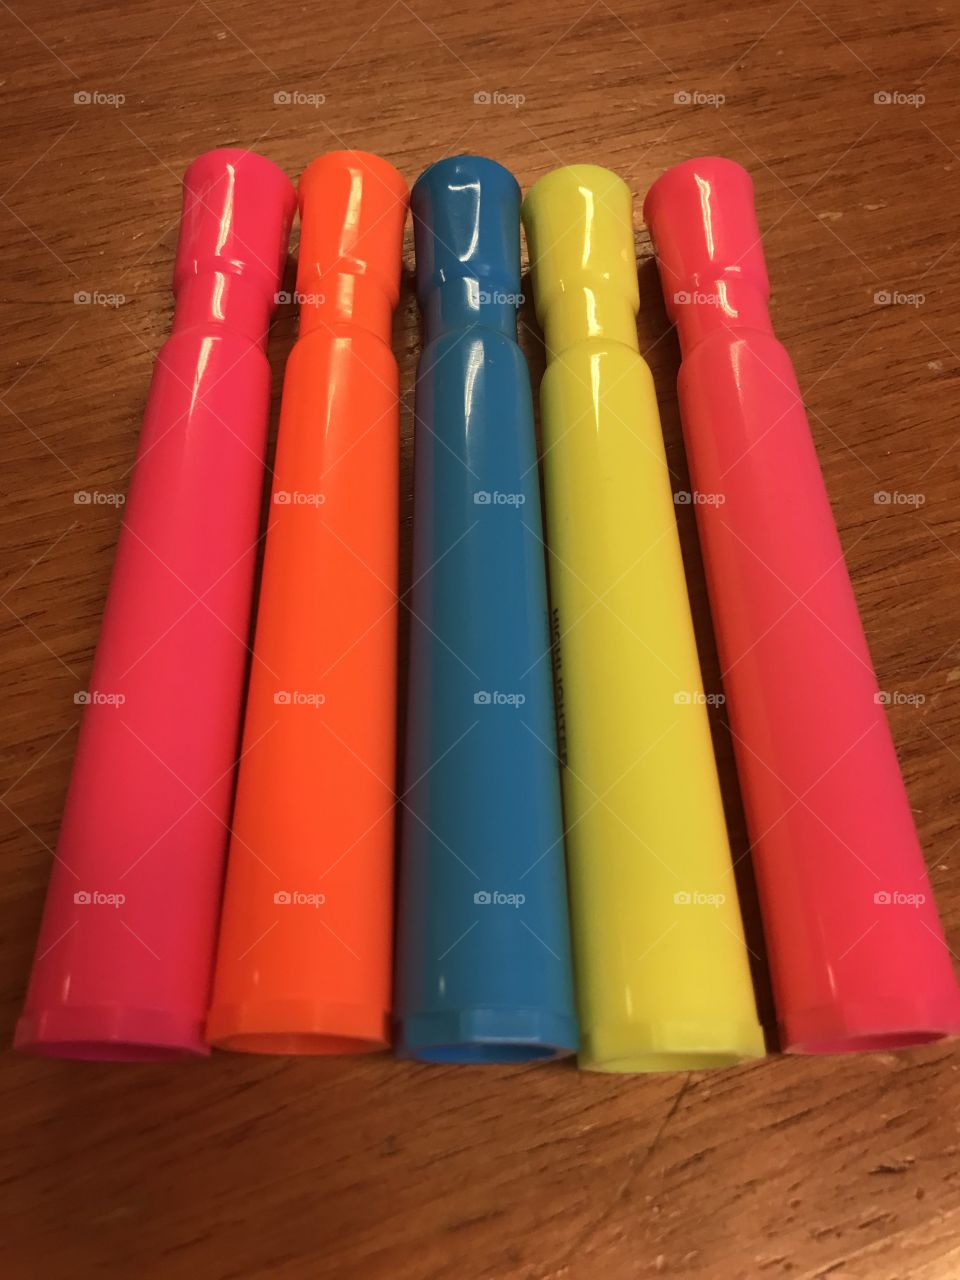 Love my highlighters !